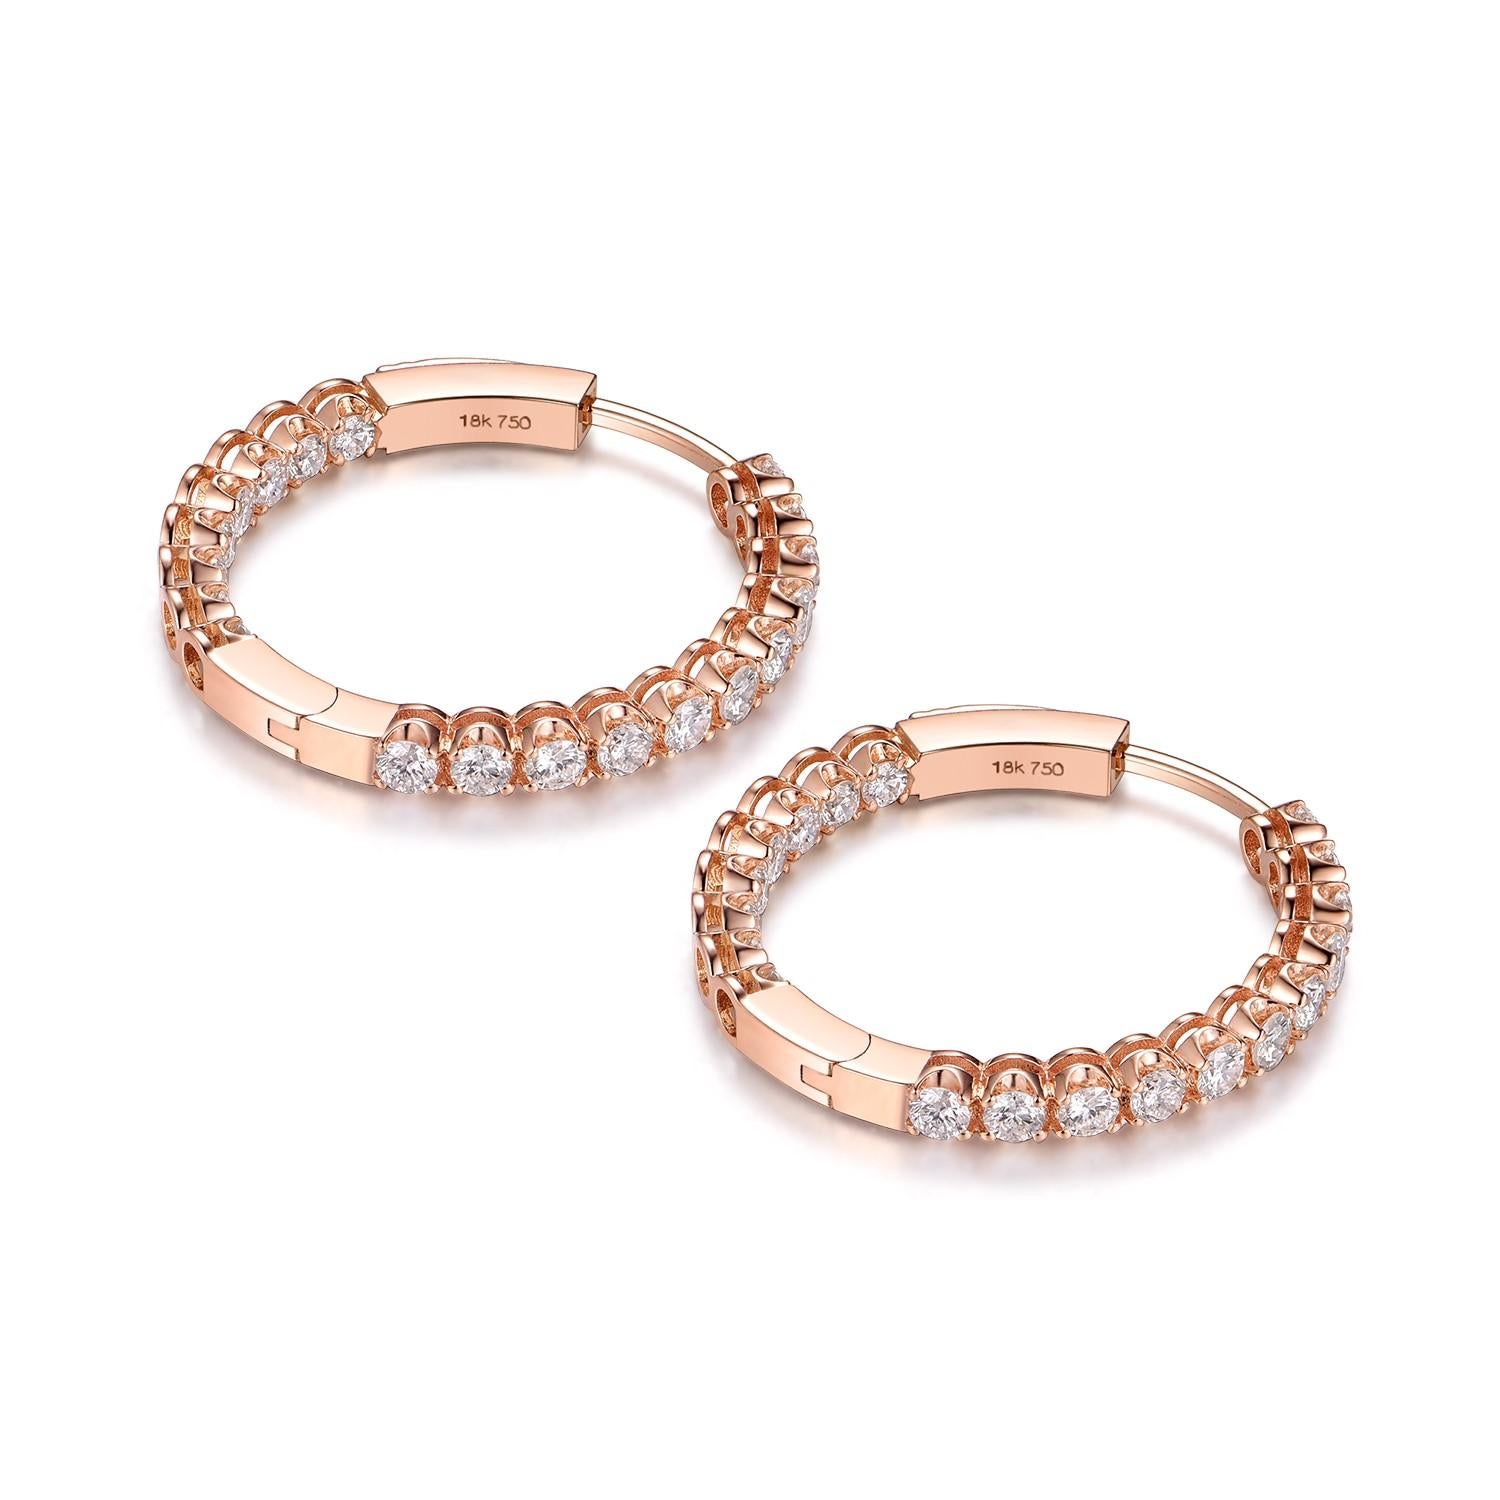 Presenting our 18 Karat Rose Gold Diamond Hoop Earrings, a striking blend of elegance and contemporary design. These stunning earrings are a testament to refined taste and high-end craftsmanship, and are bound to make a chic addition to any jewelry